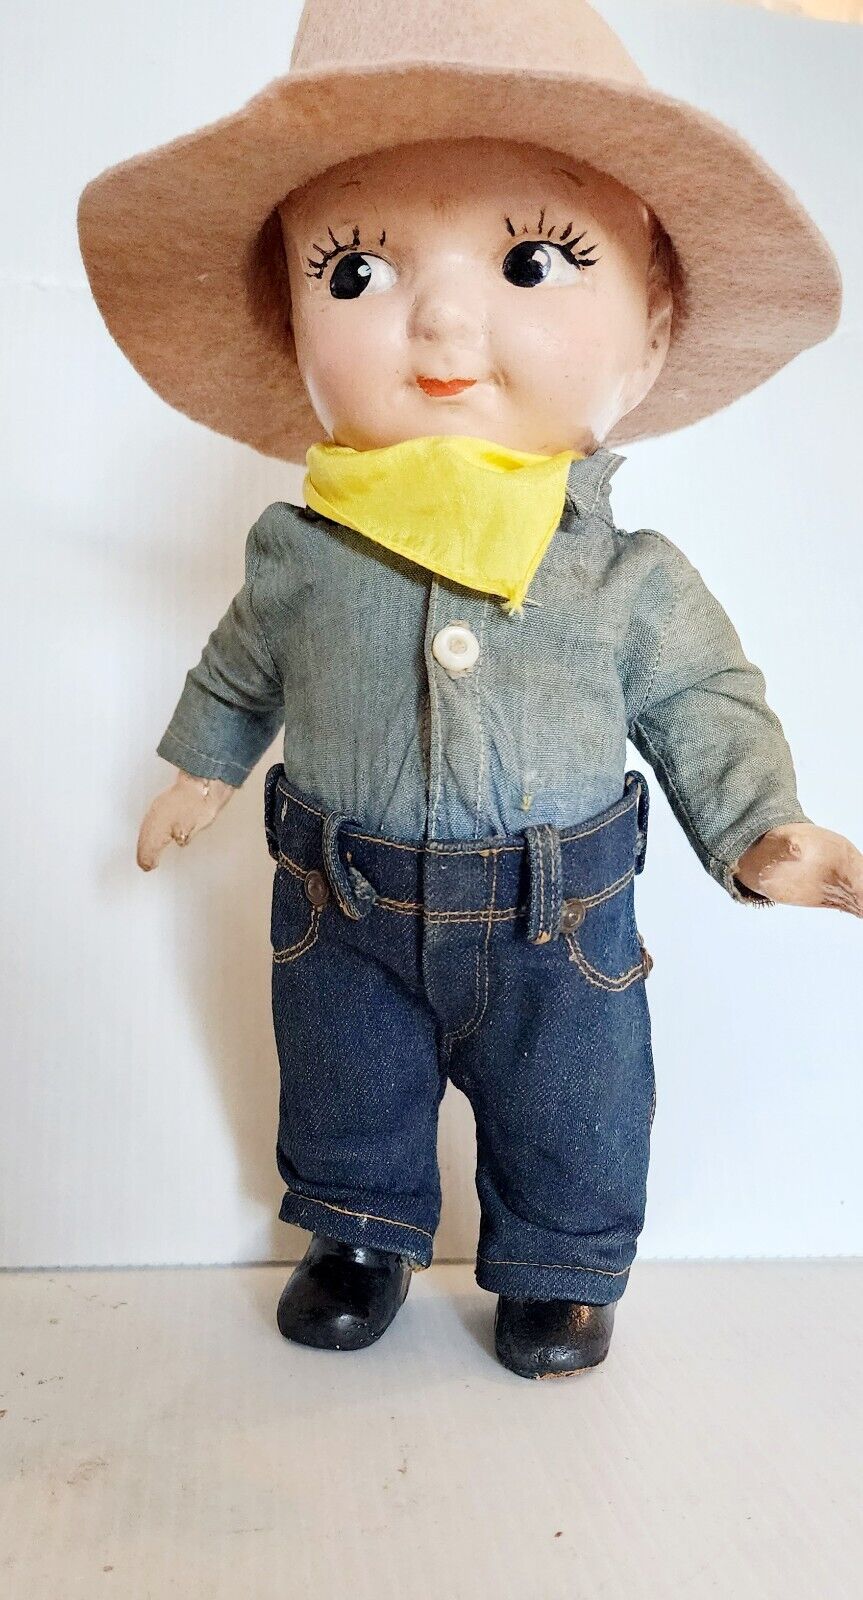 Vintage Buddy Lee Avertising Doll Composition DOLL